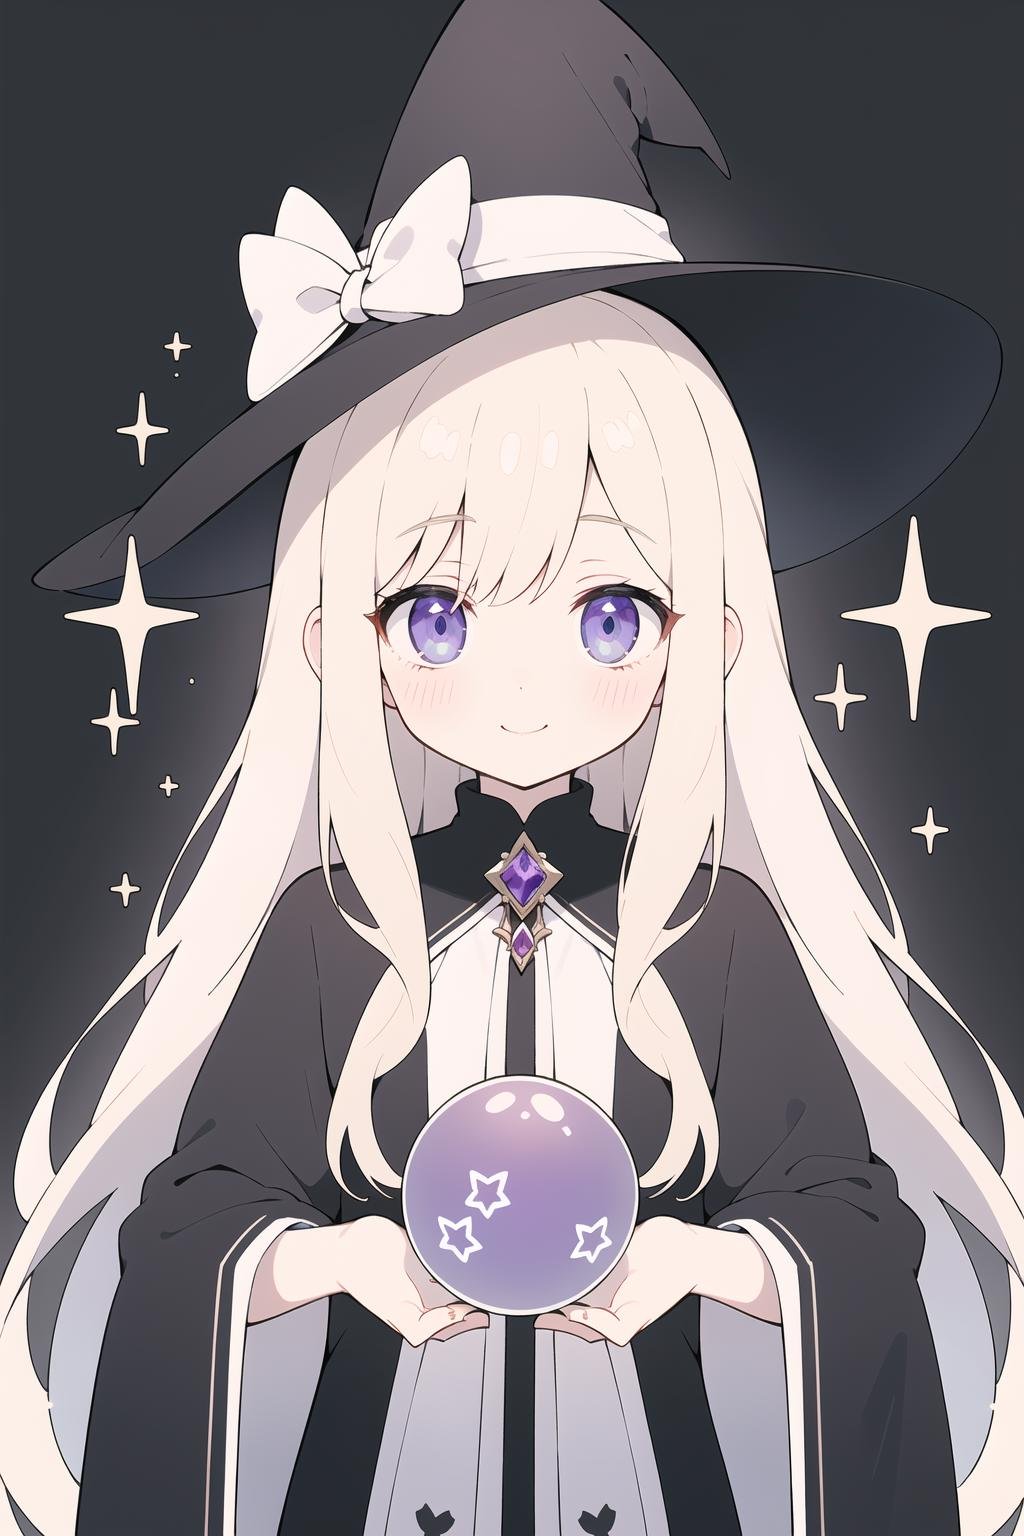 She is a cute magician girl,  with a head of soft purple long hair,  paired with a black pointed hat. Her eyes are deep purple,  shining with curiosity and wisdom. She has two small dimples on her cheeks,  which make her look very cute when she smiles. She wears a black robe,  embroidered with various mysterious symbols and patterns. She holds a white wand in her hand,  and there is a purple crystal ball at the top of the wand,  which flickers with magic. She is a kind and brave magician girl,  who always uses her magic to bring happiness and joy to people.